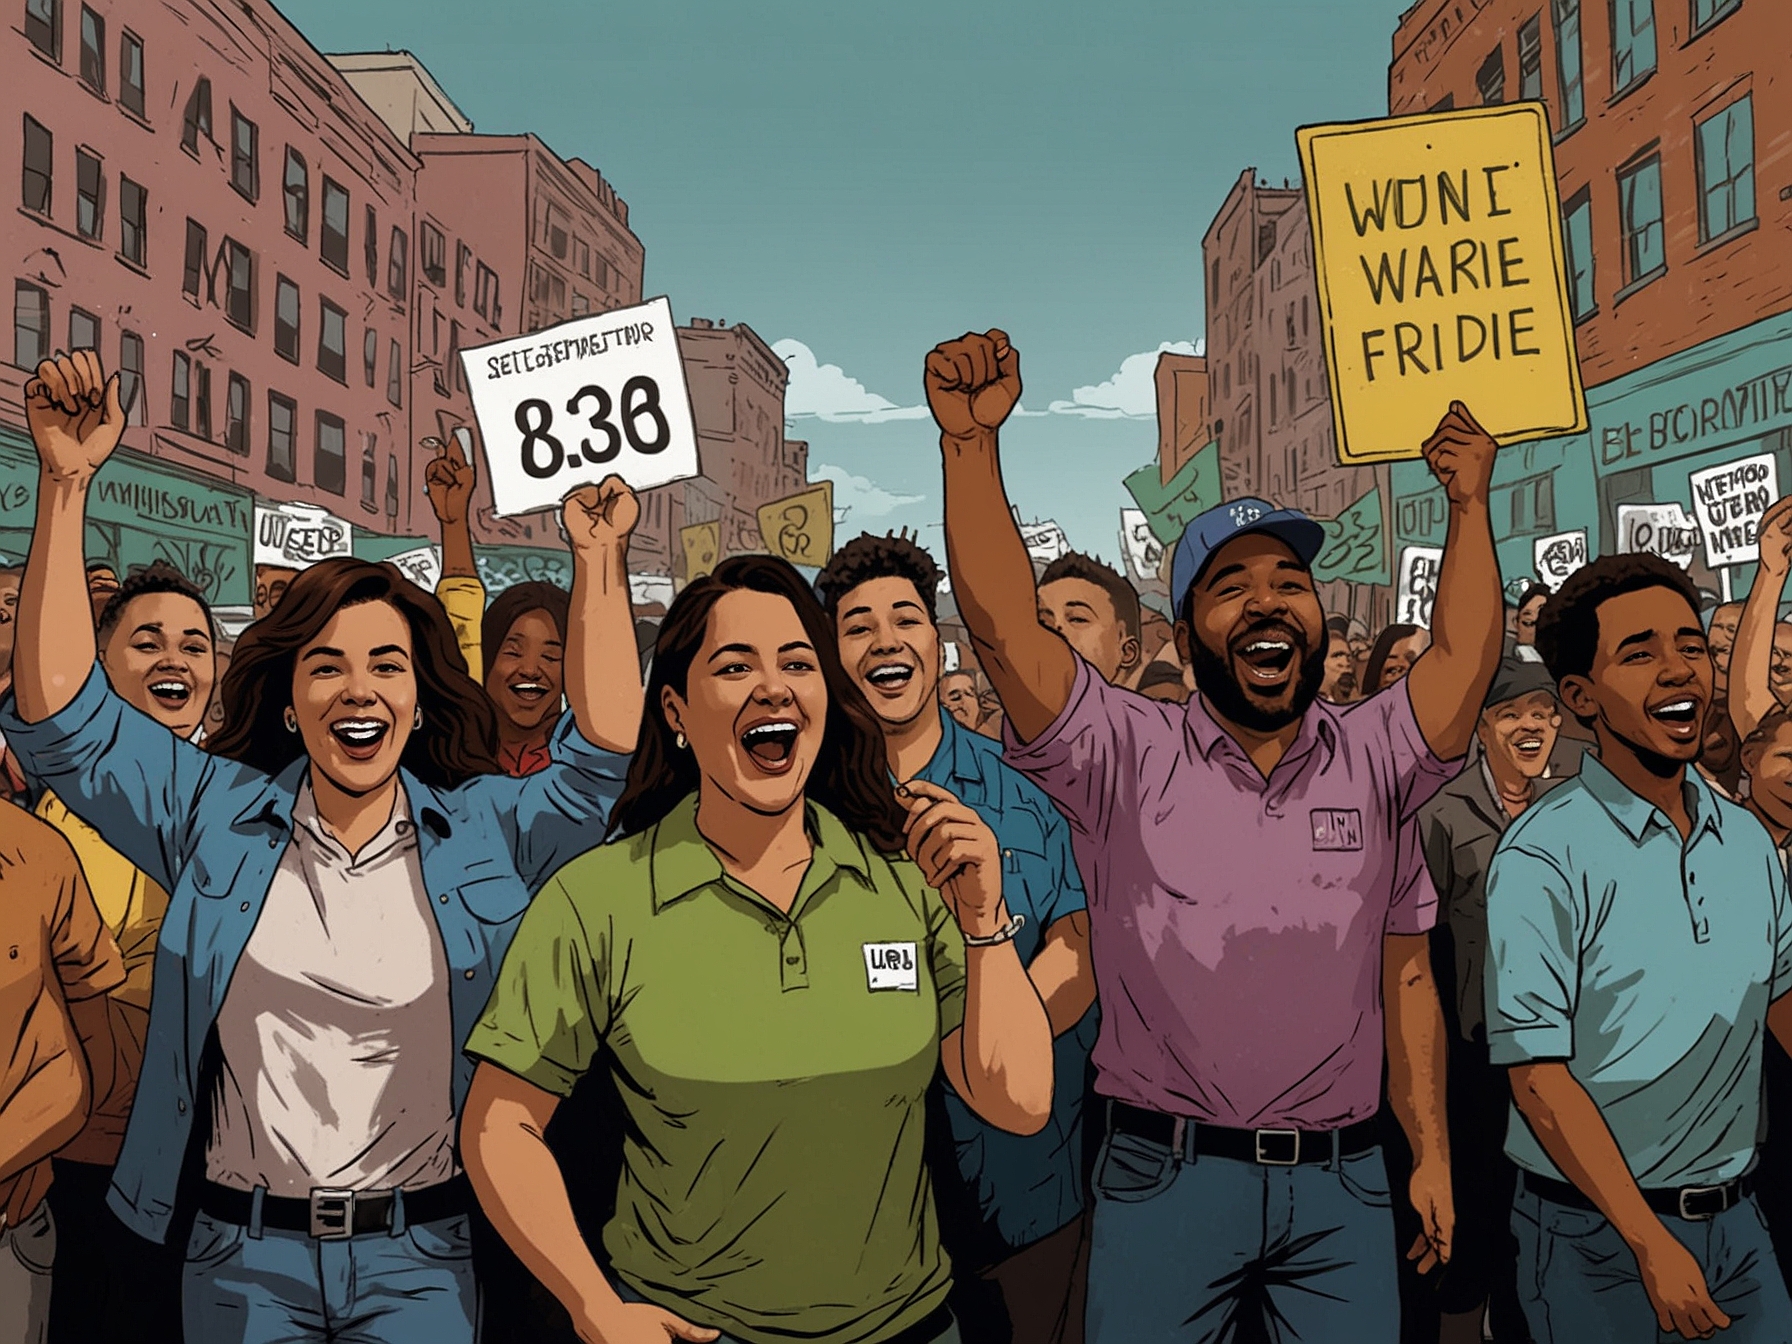 Image showing Uber and Lyft drivers celebrating the landmark $32.50 minimum hourly wage settlement in Massachusetts, symbolizing a major victory for gig workers' rights and fair compensation.